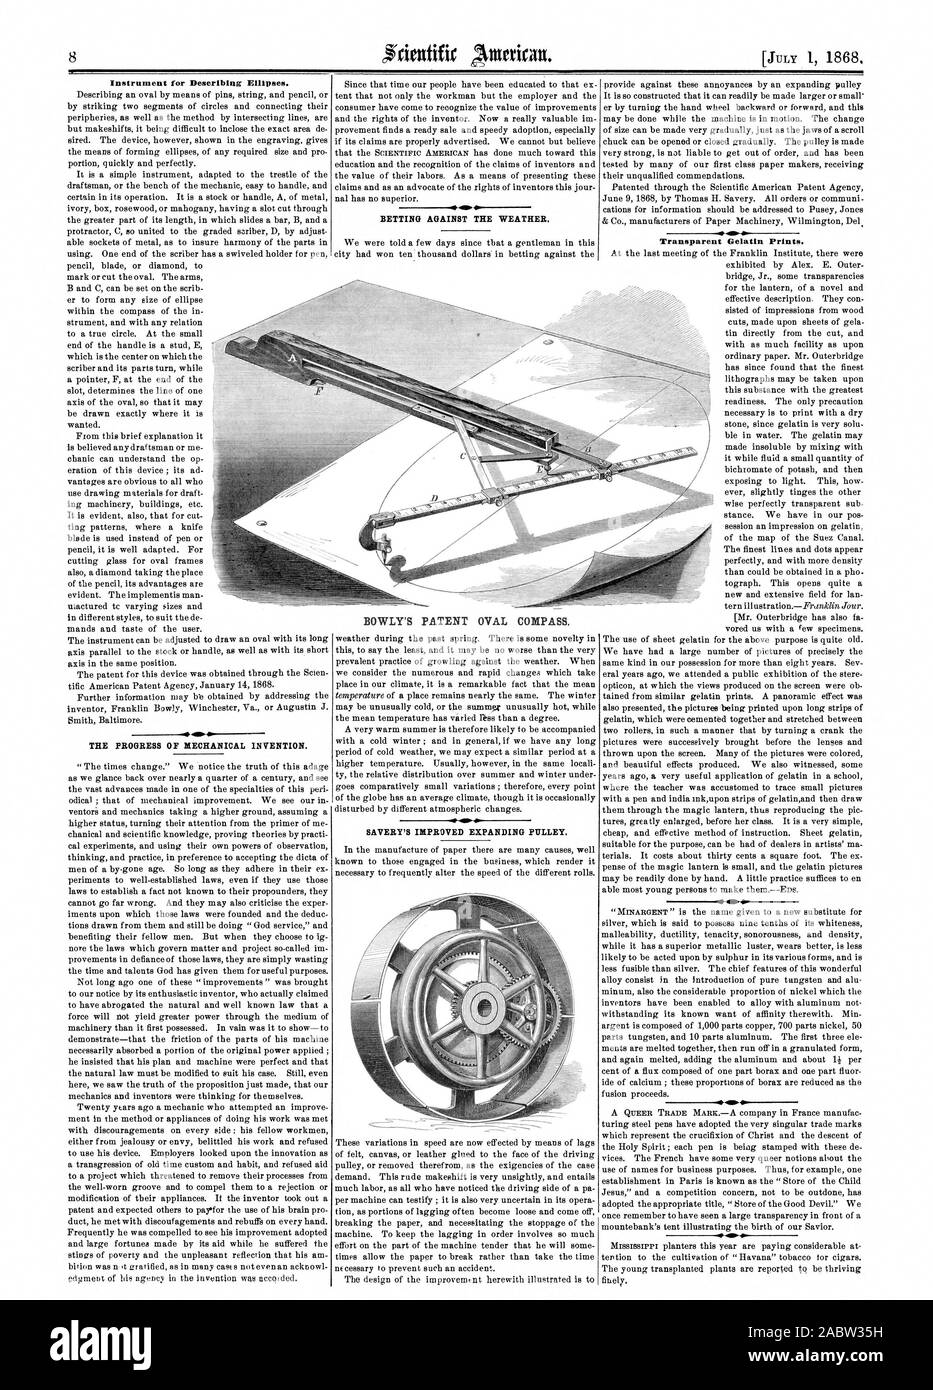 Instrument for Describing Ellipses. THE PROGRESS OF MECHANICAL INVENTION. BETTING AGAINST THE WEATHER. BOWLY'S PATENT OVAL COMPASS SAVERY'S IMPROVED EXPANDING PULLEY. Transparent Gelatin Prints. , scientific american, 1868-07-01 Stock Photo